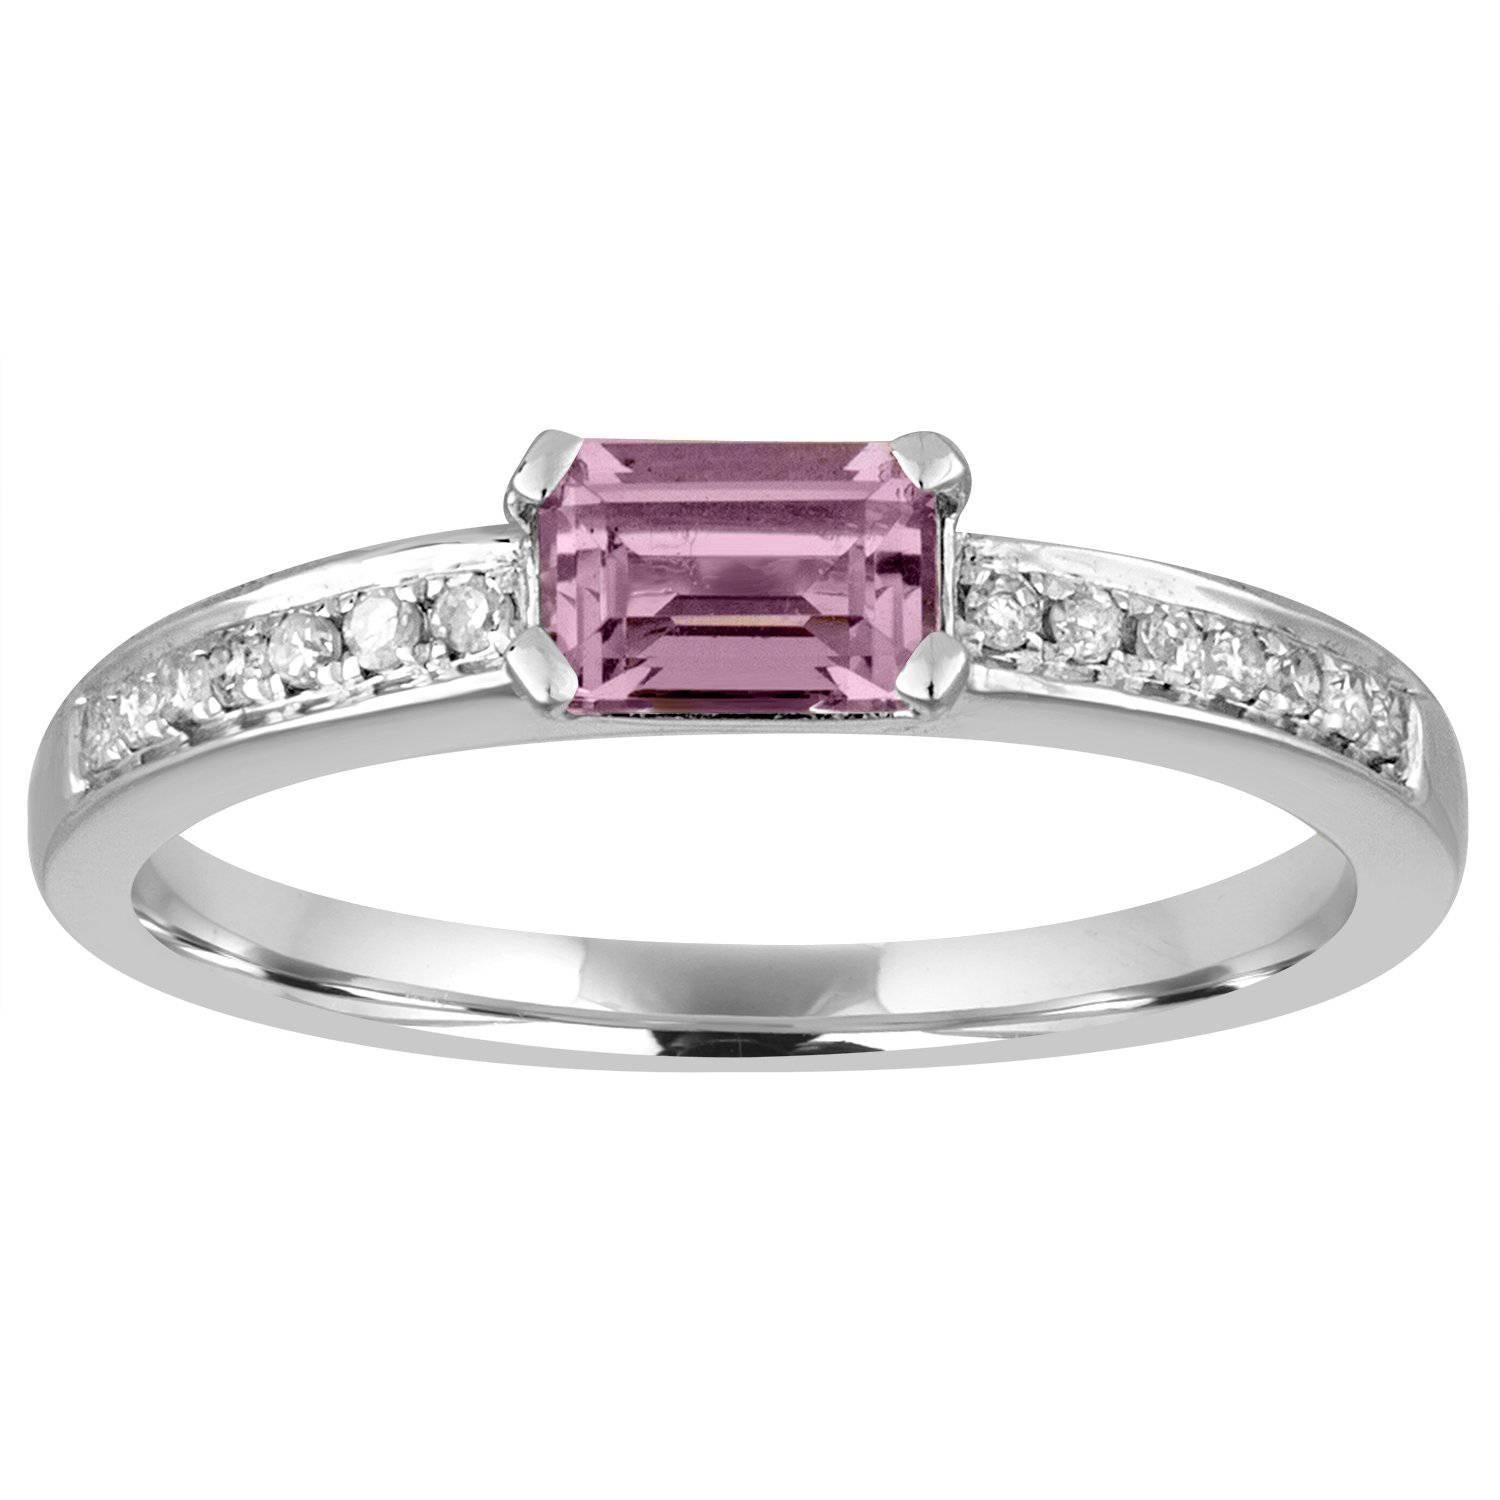 Stackable 0.37 Carat Amethyst Baguette and Diamond Gold Ring